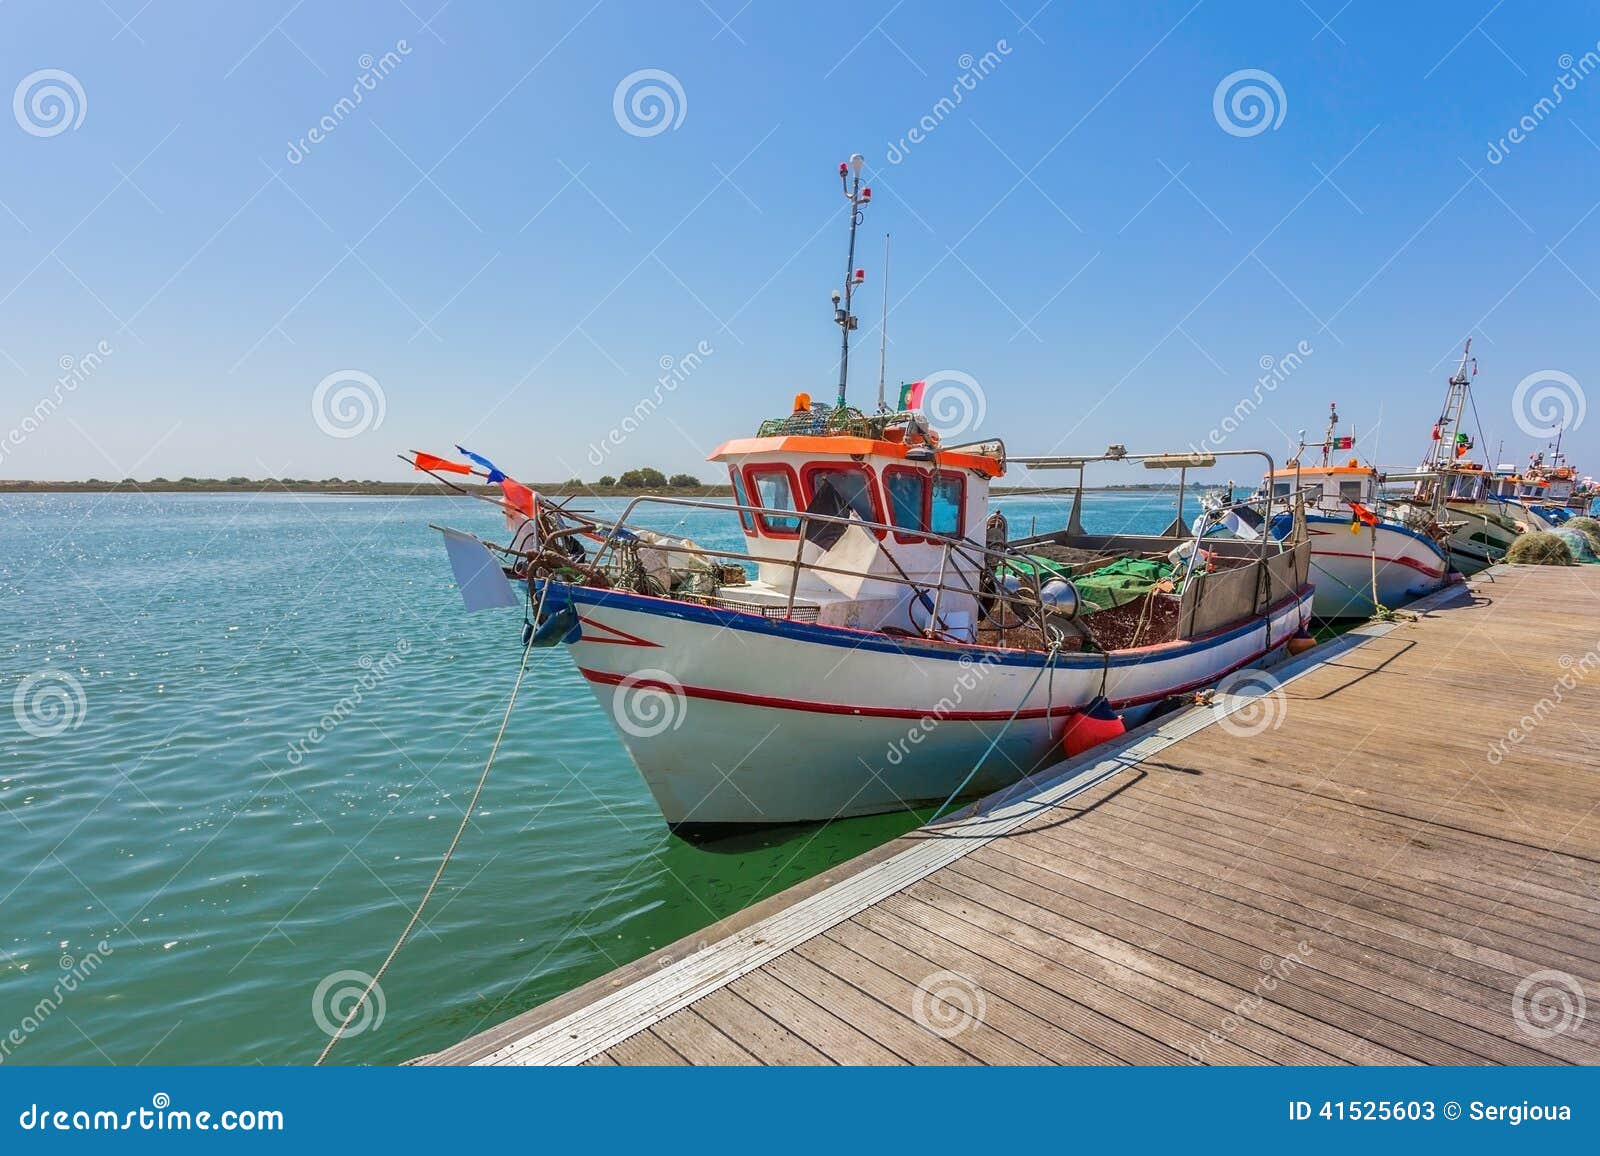 Portuguese Fishing Boat On The Pier. Stock Image - Image ...